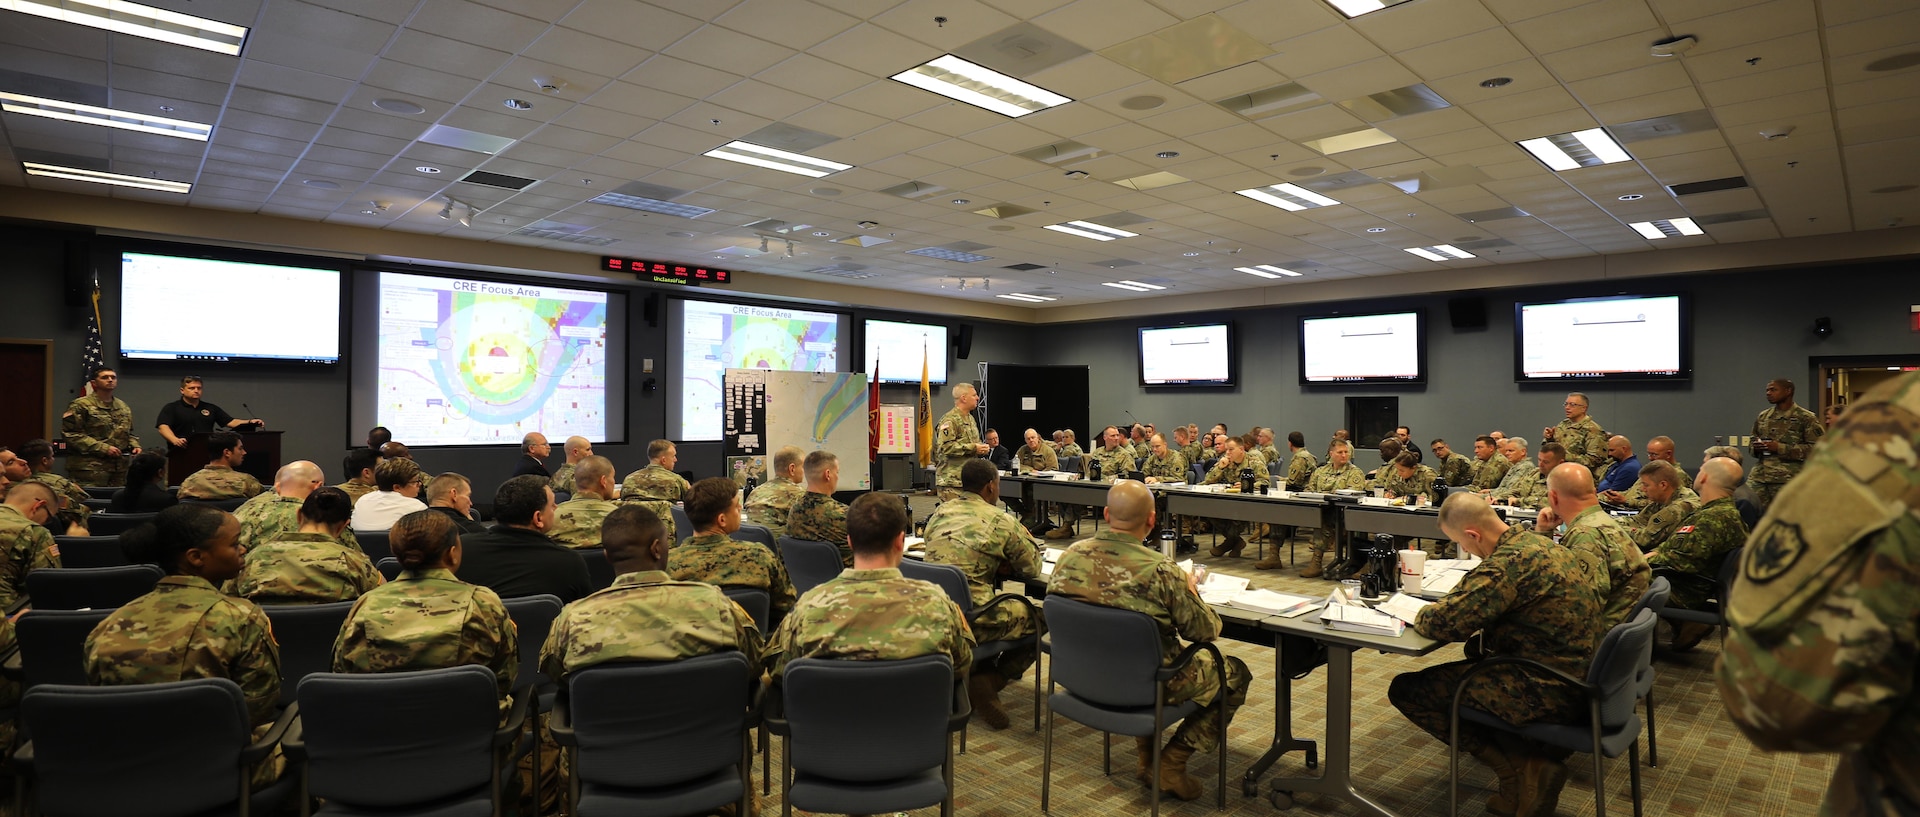 U.S. Army Maj. Gen. Bill Hall, JTF-CS commander speaks to senior leaders and representatives at the Mission Planning Conference (MPC), Fort Eustis, Va., Dec. 3-4, 2018. The MPC prepared and strengthened communication roles of the Defense Chemical, Biological, Radiological and Nuclear (CBRN) Response Force (DCRF) and other DoD CBRN Response Enterprise (CRE) entities for participation in response operations. In the event of a catastrophic CBRN incident, the JTF-CS and DCRF missions assist local, state, federal and tribal partners in saving lives, preventing further injury, and providing critical support to enable community recovery when conducting Defense Support of Civil Authorities (DSCA) response operations.
 
“This is also a good stage setter for Exercise Sudden Response/Determined Response in January 2019 because we addressed important issues and solutions, leading to an action plan for success,” said Hall. (DoD photo by U.S. Air Force Tech. Sgt. Michael Campbell/ Released)